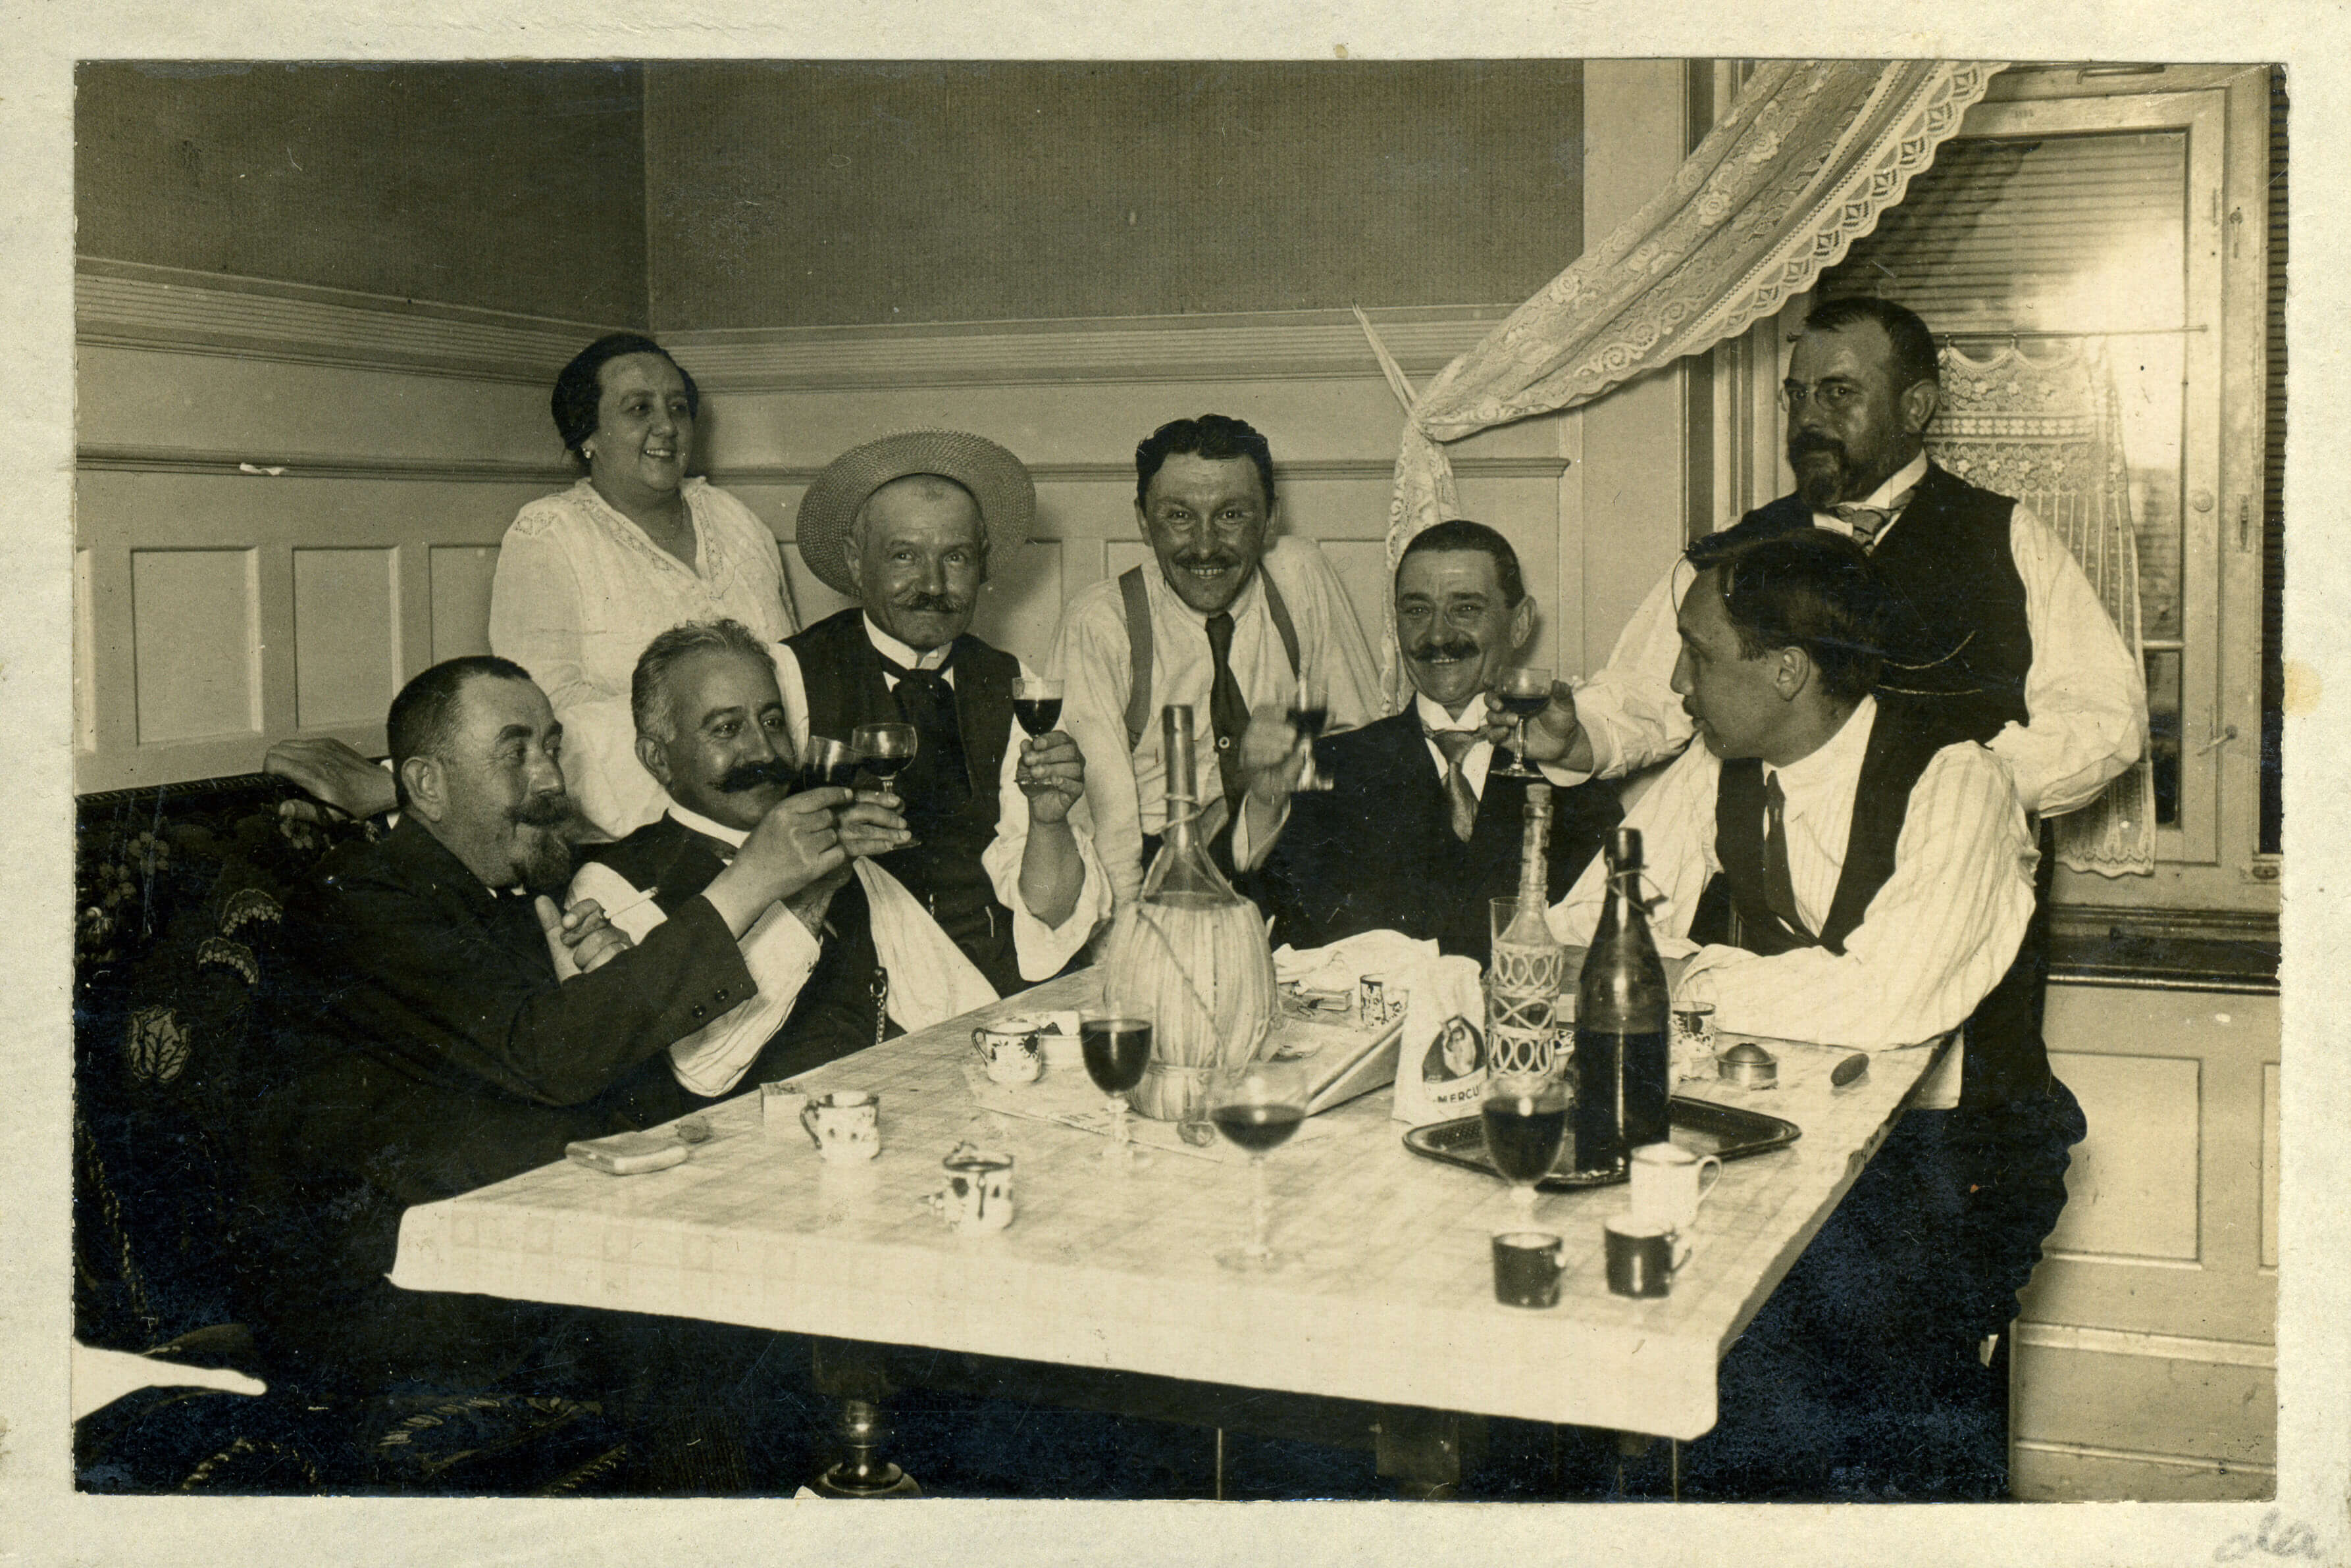 Mihailo Petrović (in a hat) “Suz” and the atmosphere of a tavern (kafana) (SASA Archive, 14188)